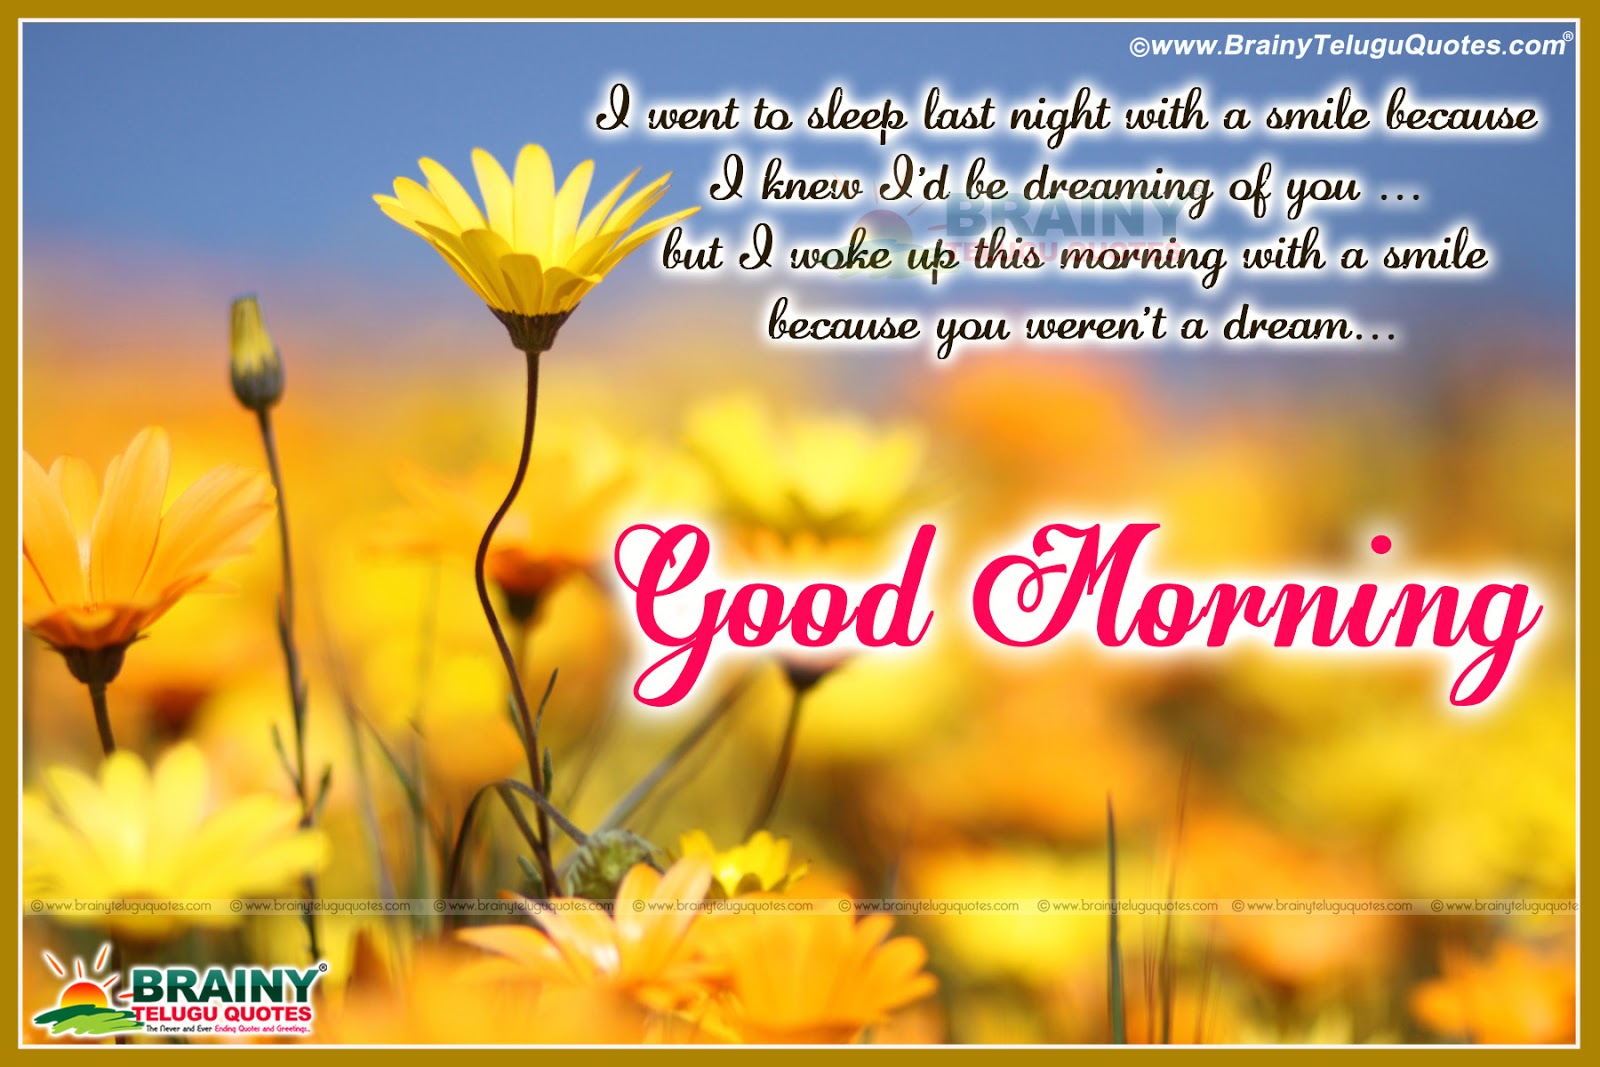 Good Morning English Wishes with Messages Wallpapers